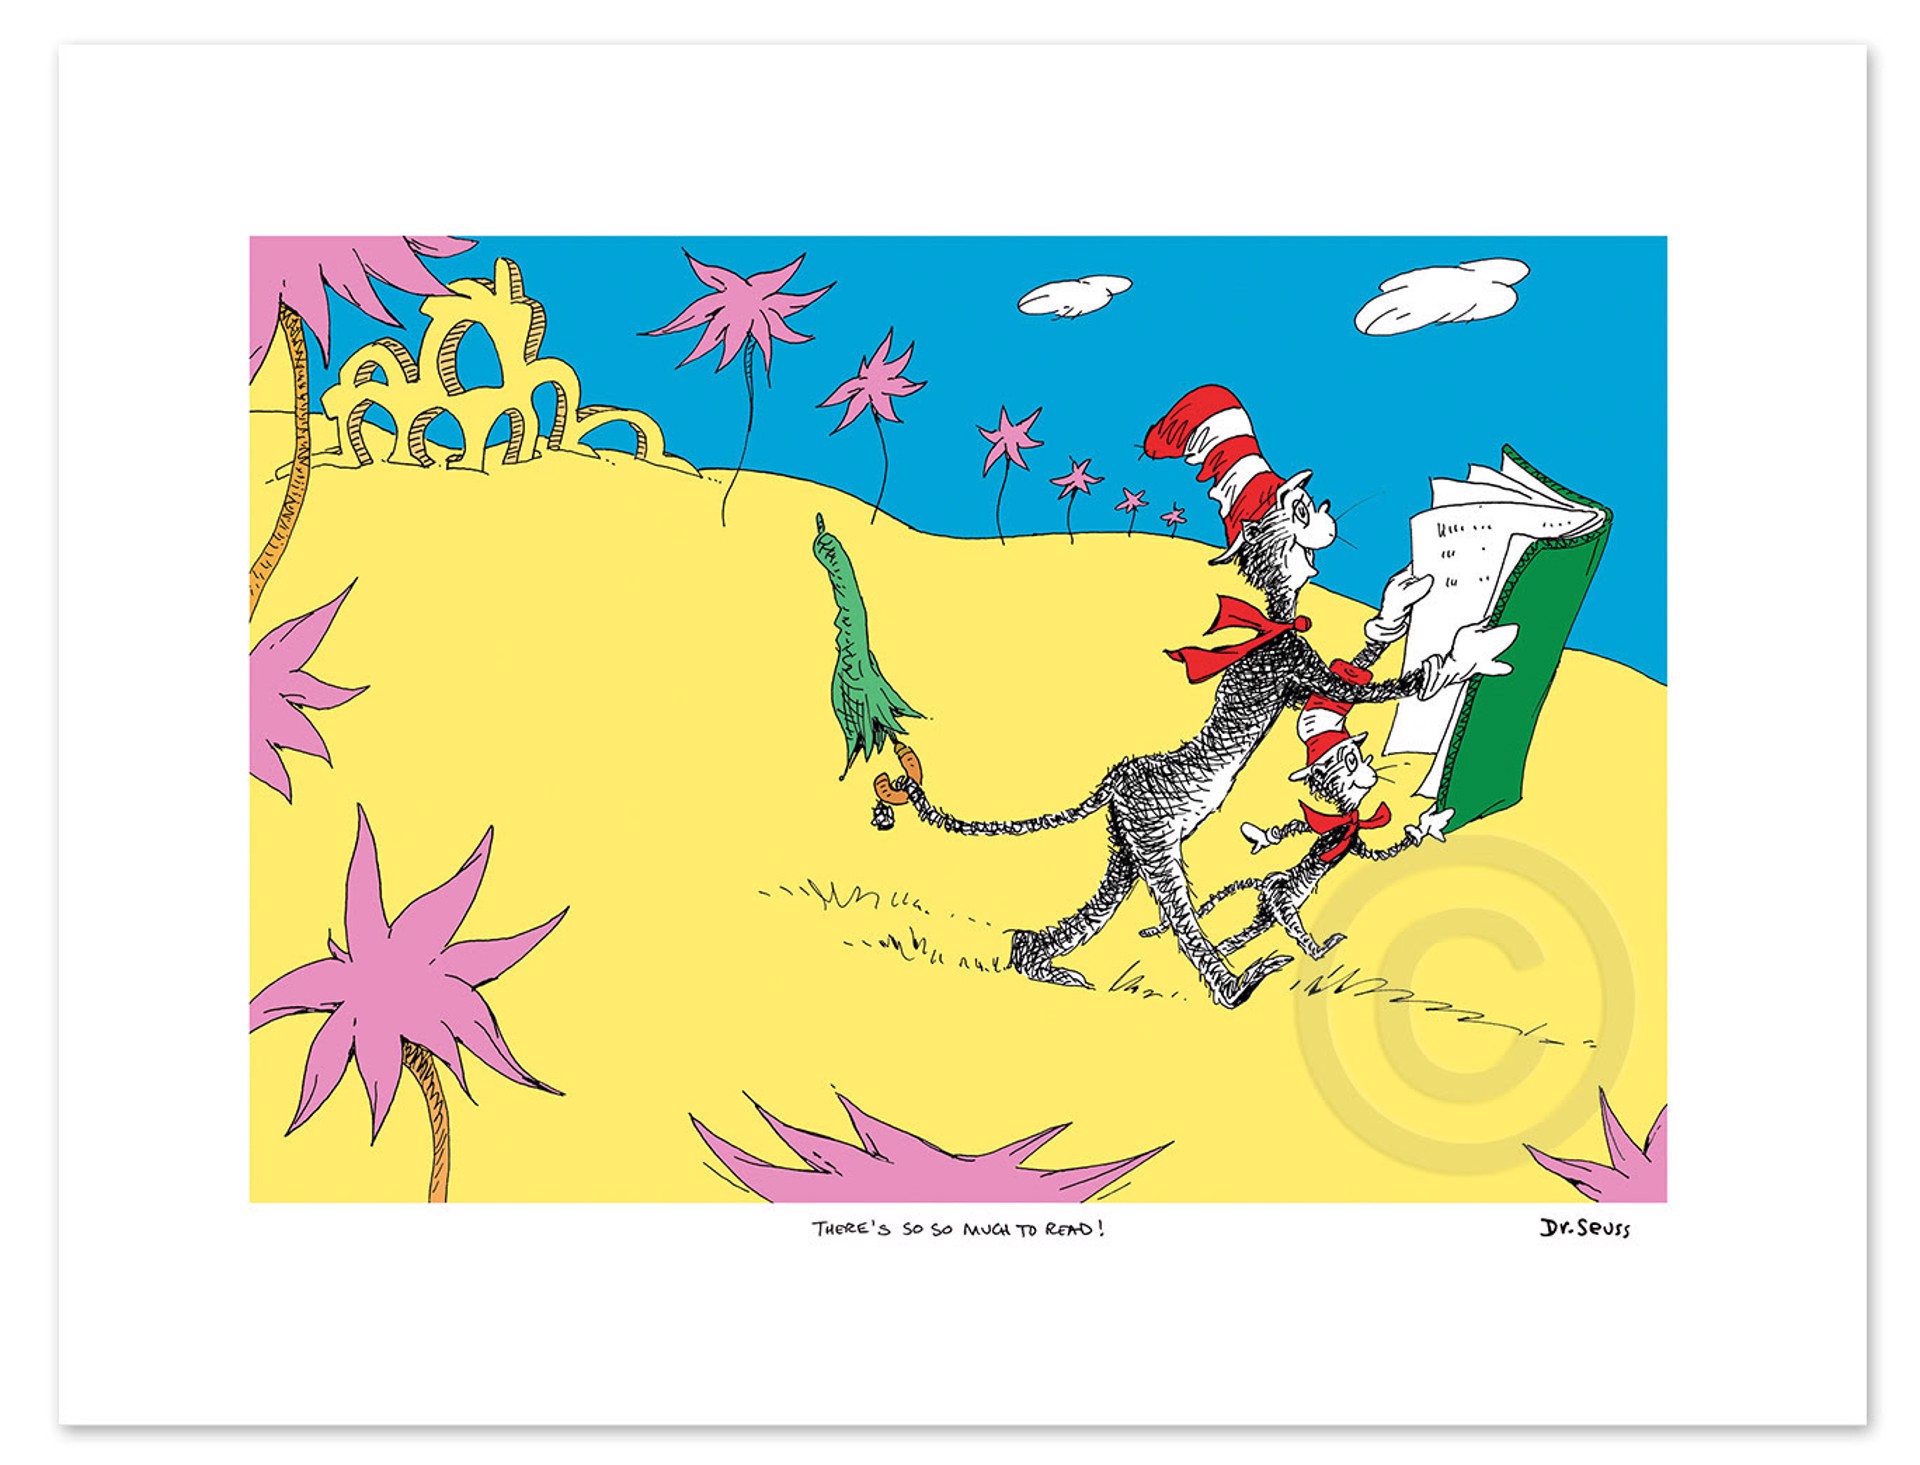 There's So So Much To Read by Theodor Seuss Geisel